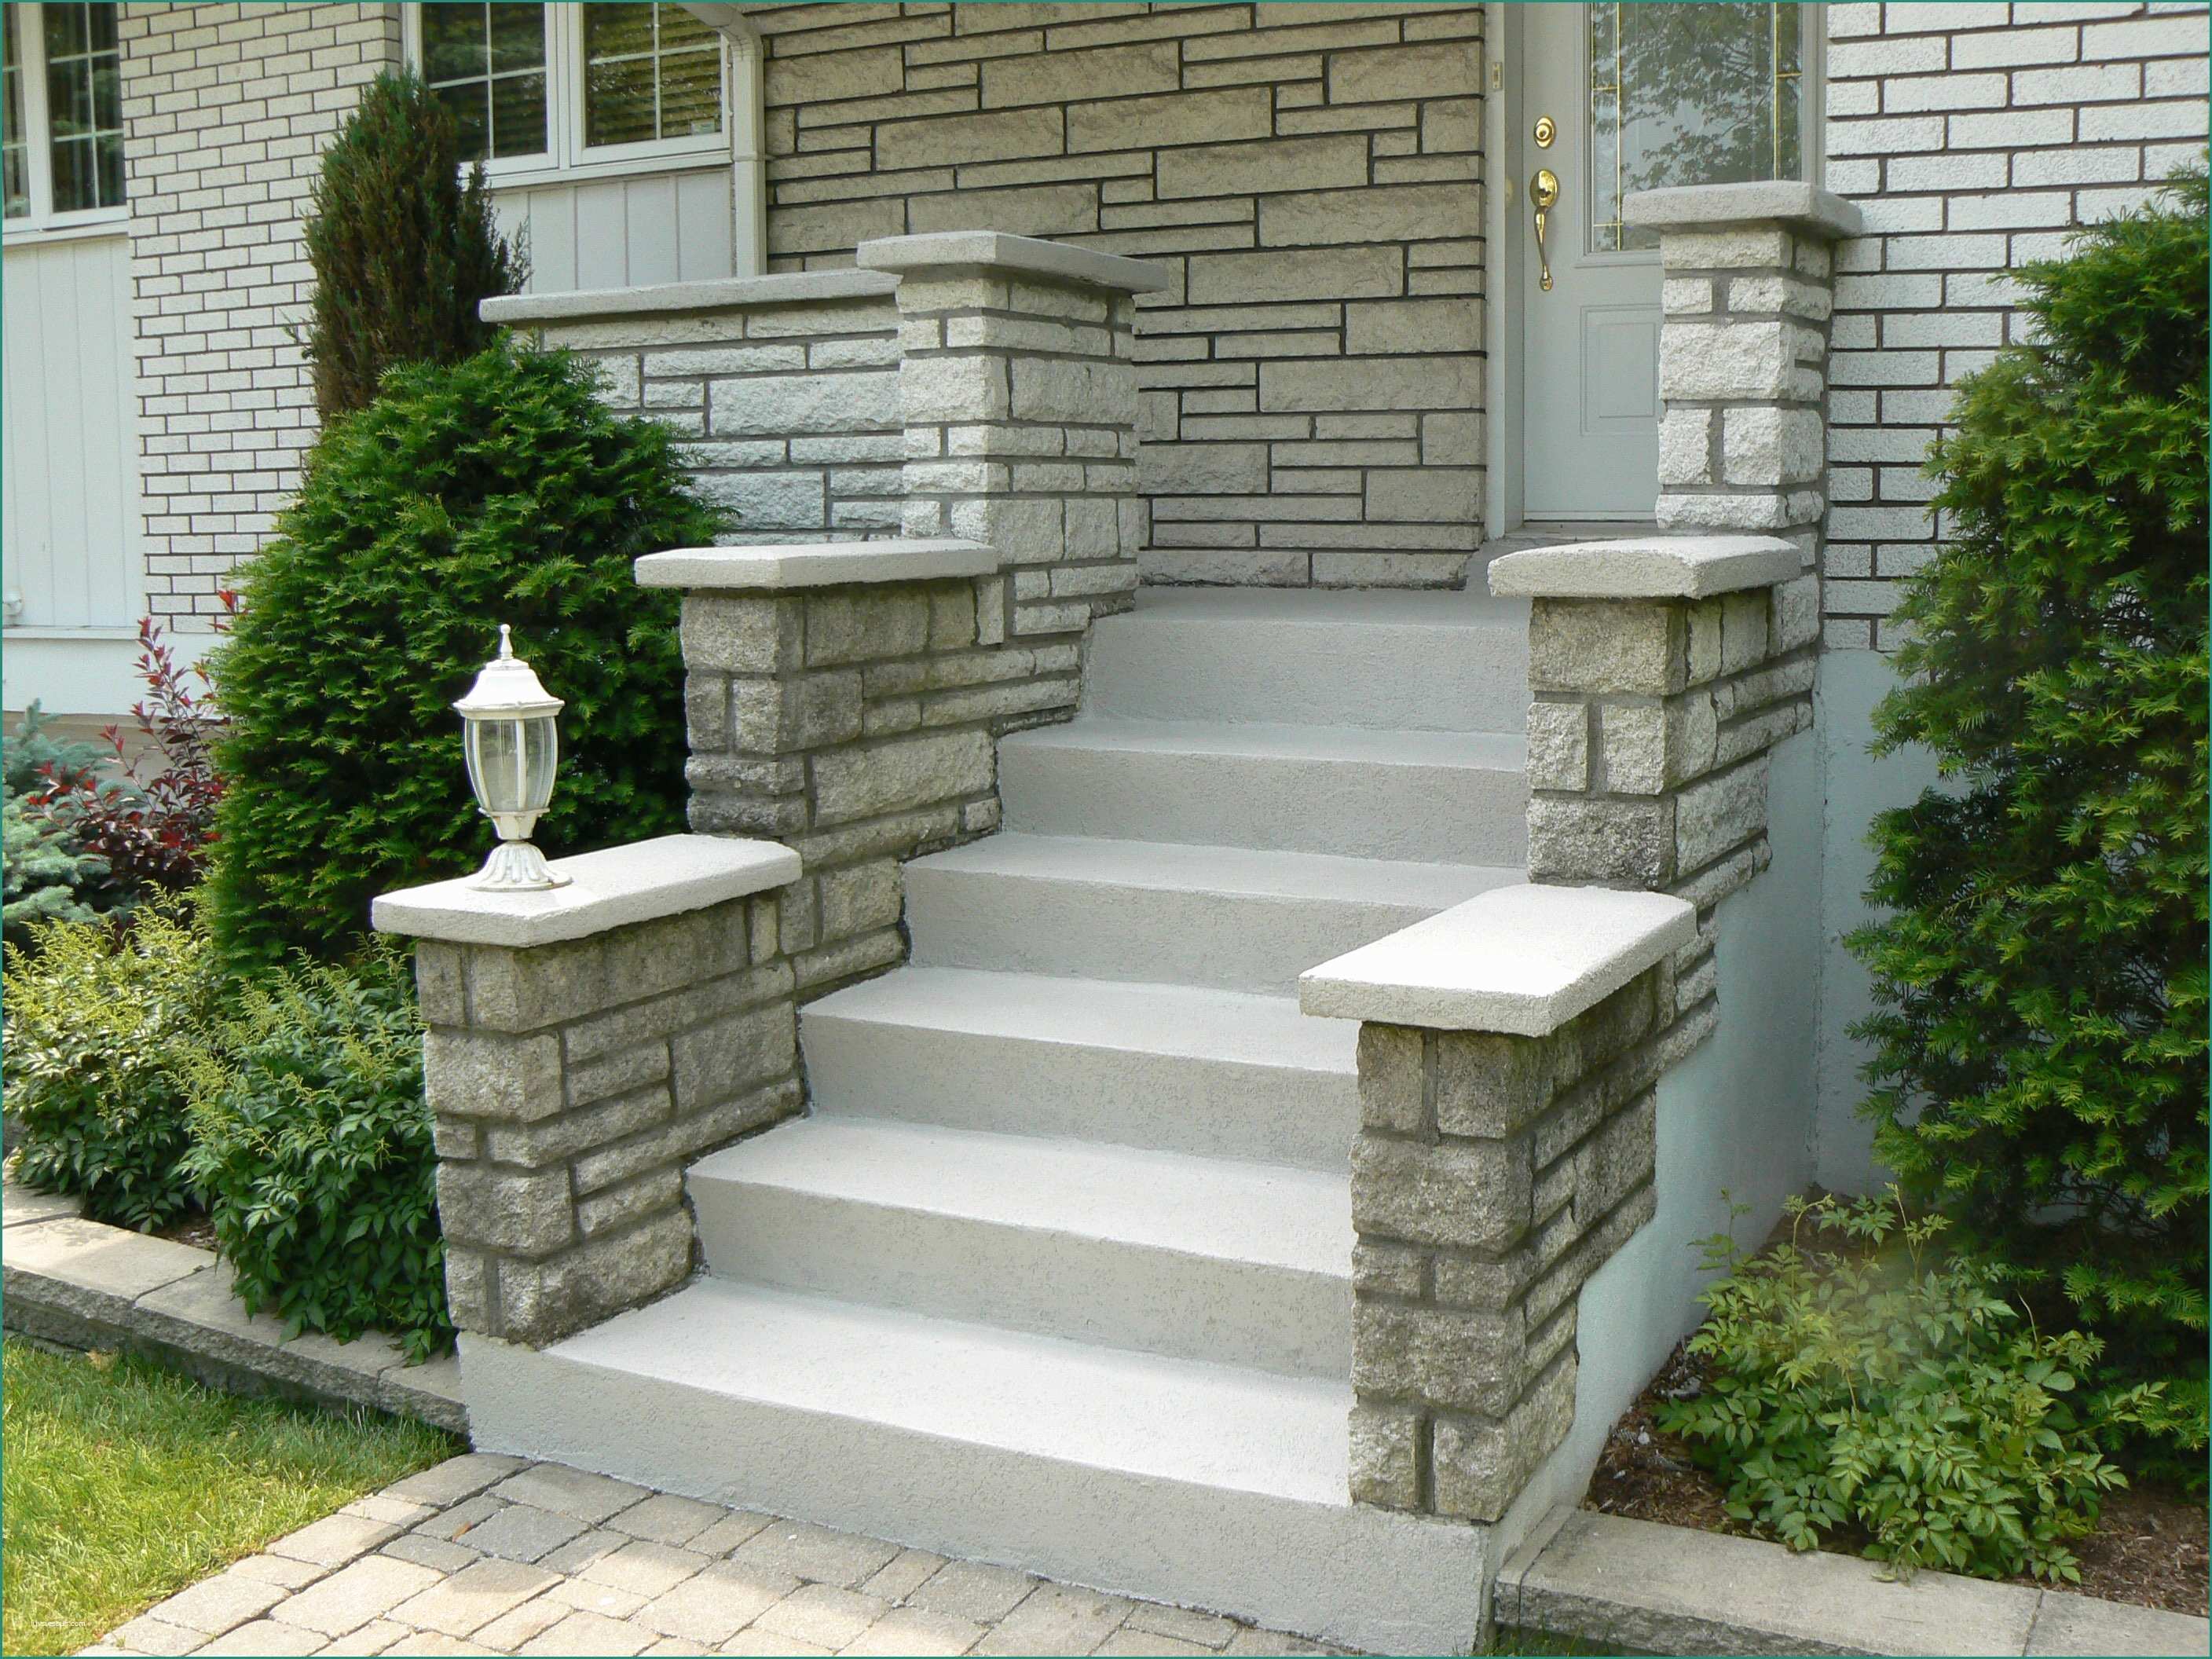 Scale Esterne In Cemento E Scale Esterne Design Fabulous Exterior Stairs House Stairs Balcony